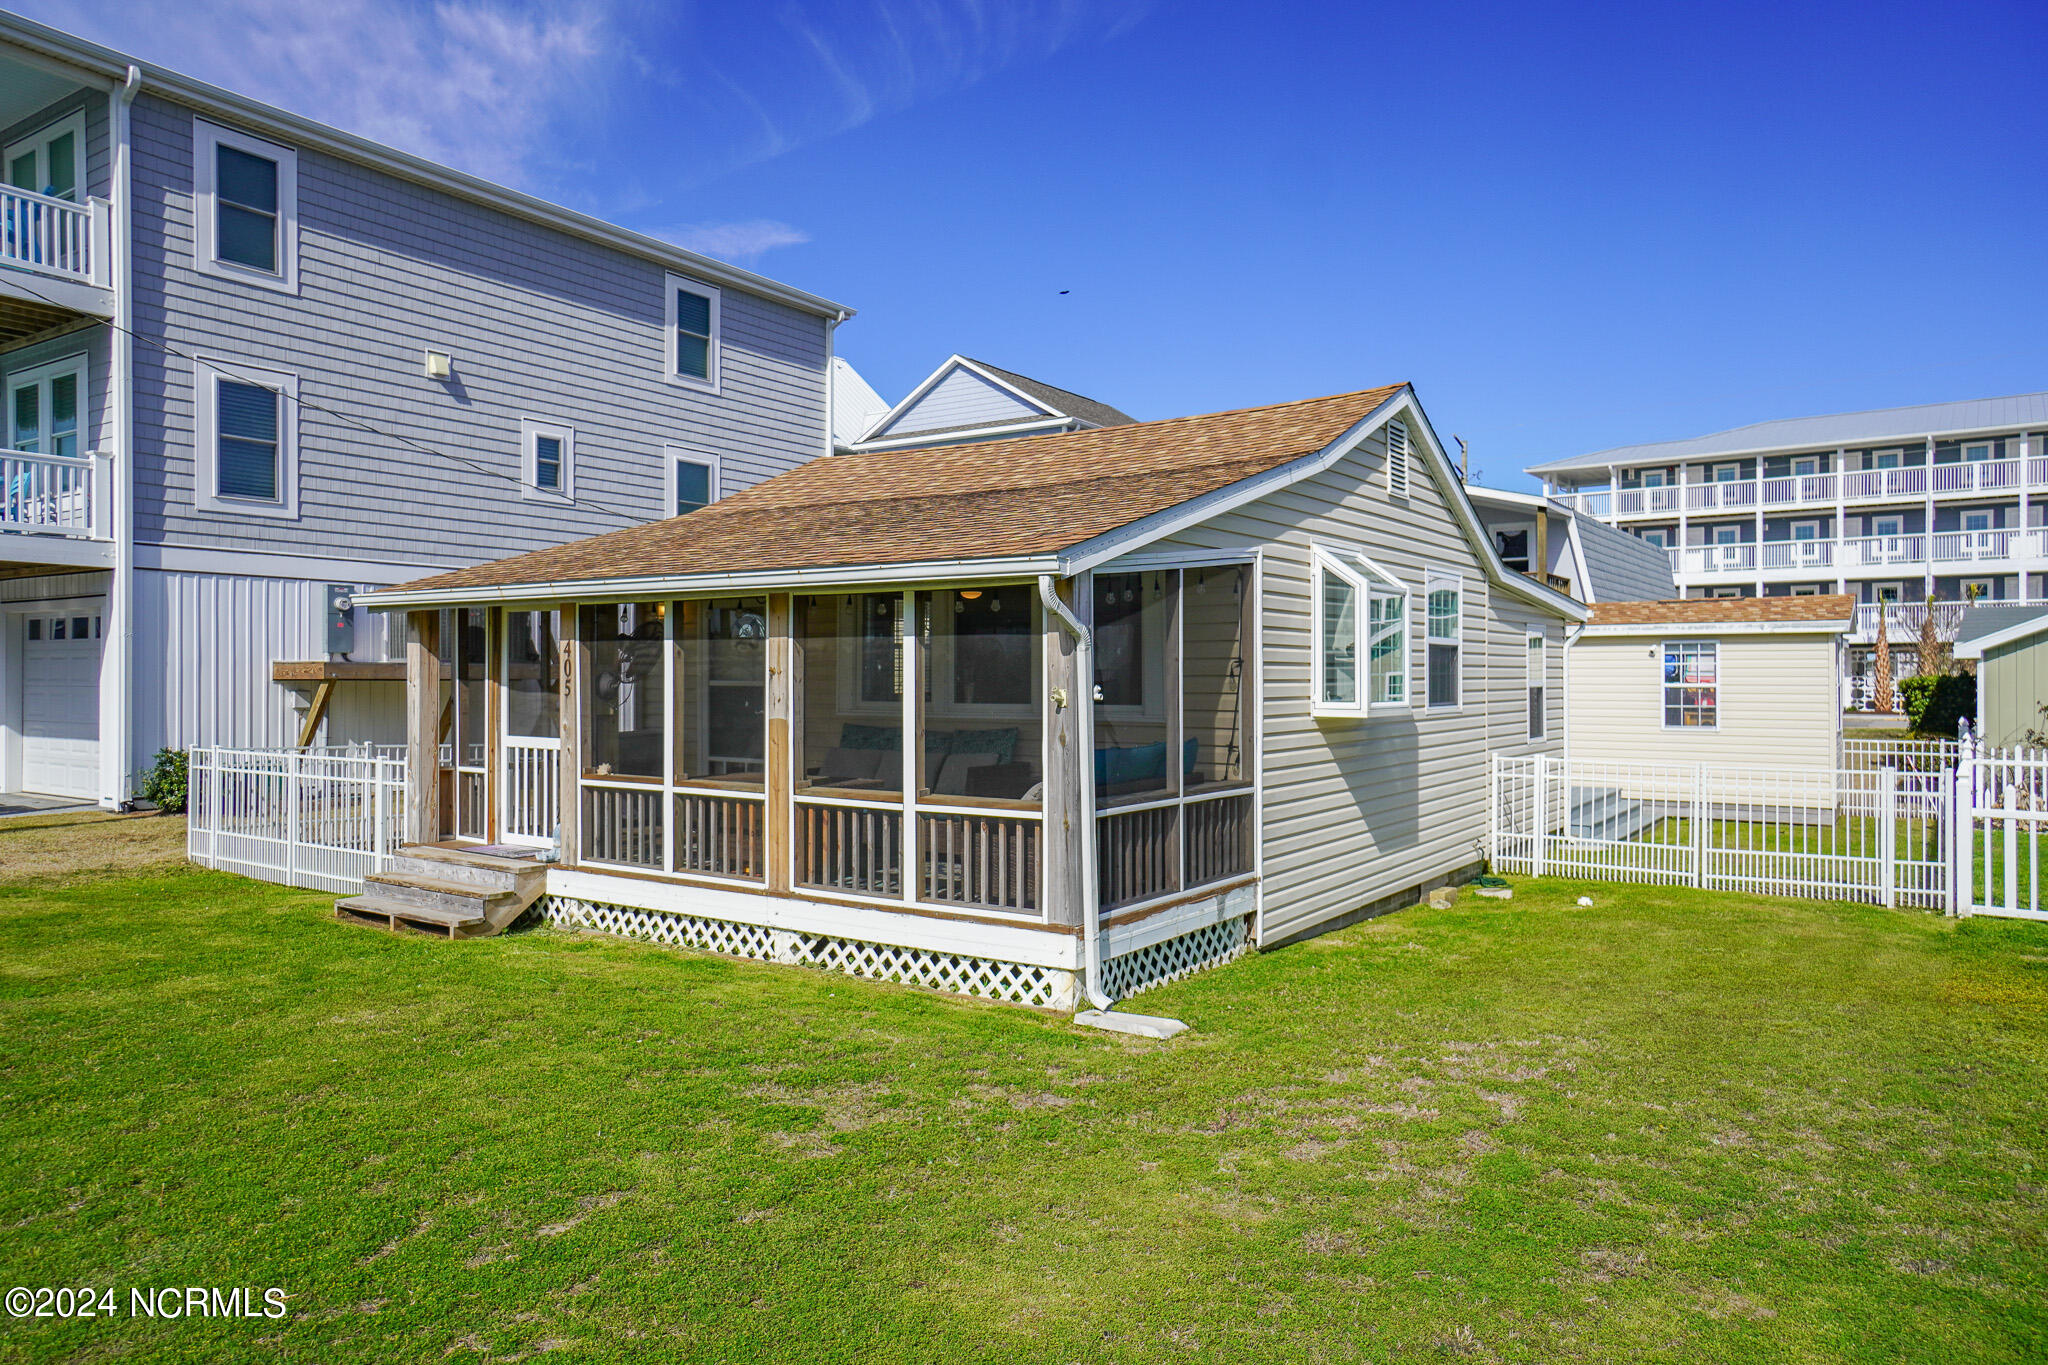 405 N Shore Drive, Surf City, North Carolina, 28445, United States, 2 Bedrooms Bedrooms, ,1 BathroomBathrooms,Residential,For Sale,405 N Shore Drive,1487237